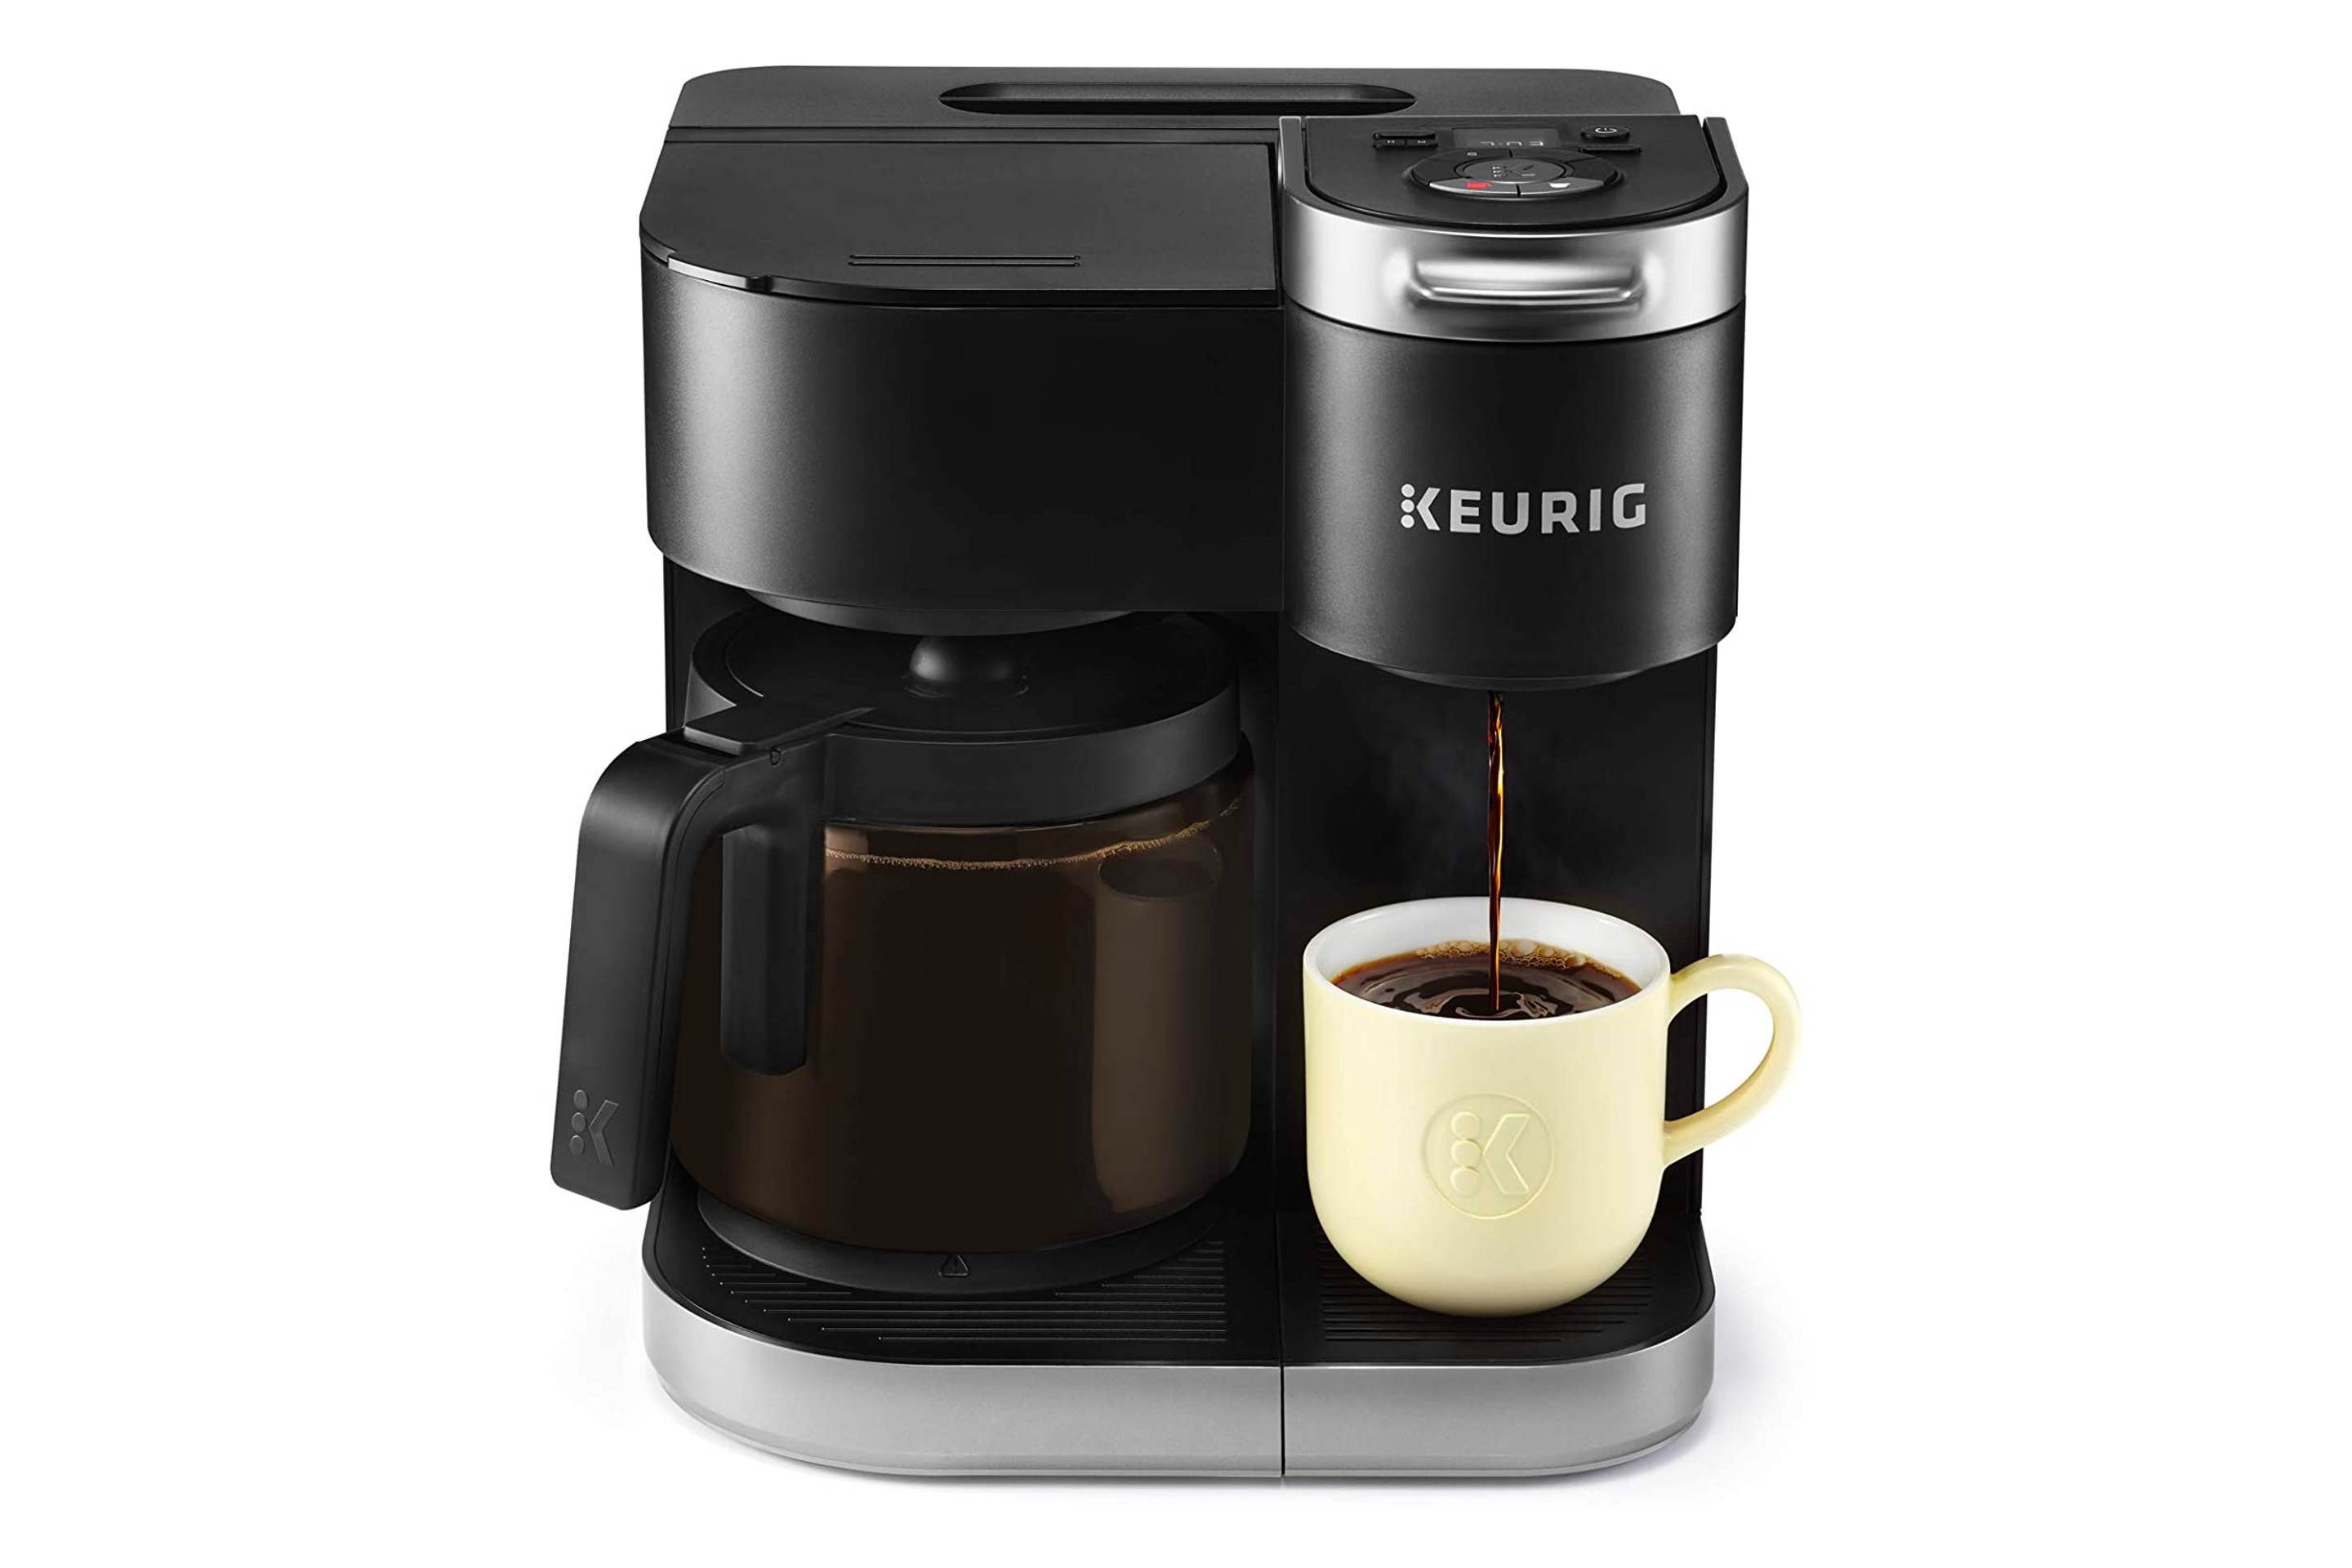 Keurig coffee maker with coffee pot and single-serve abilities